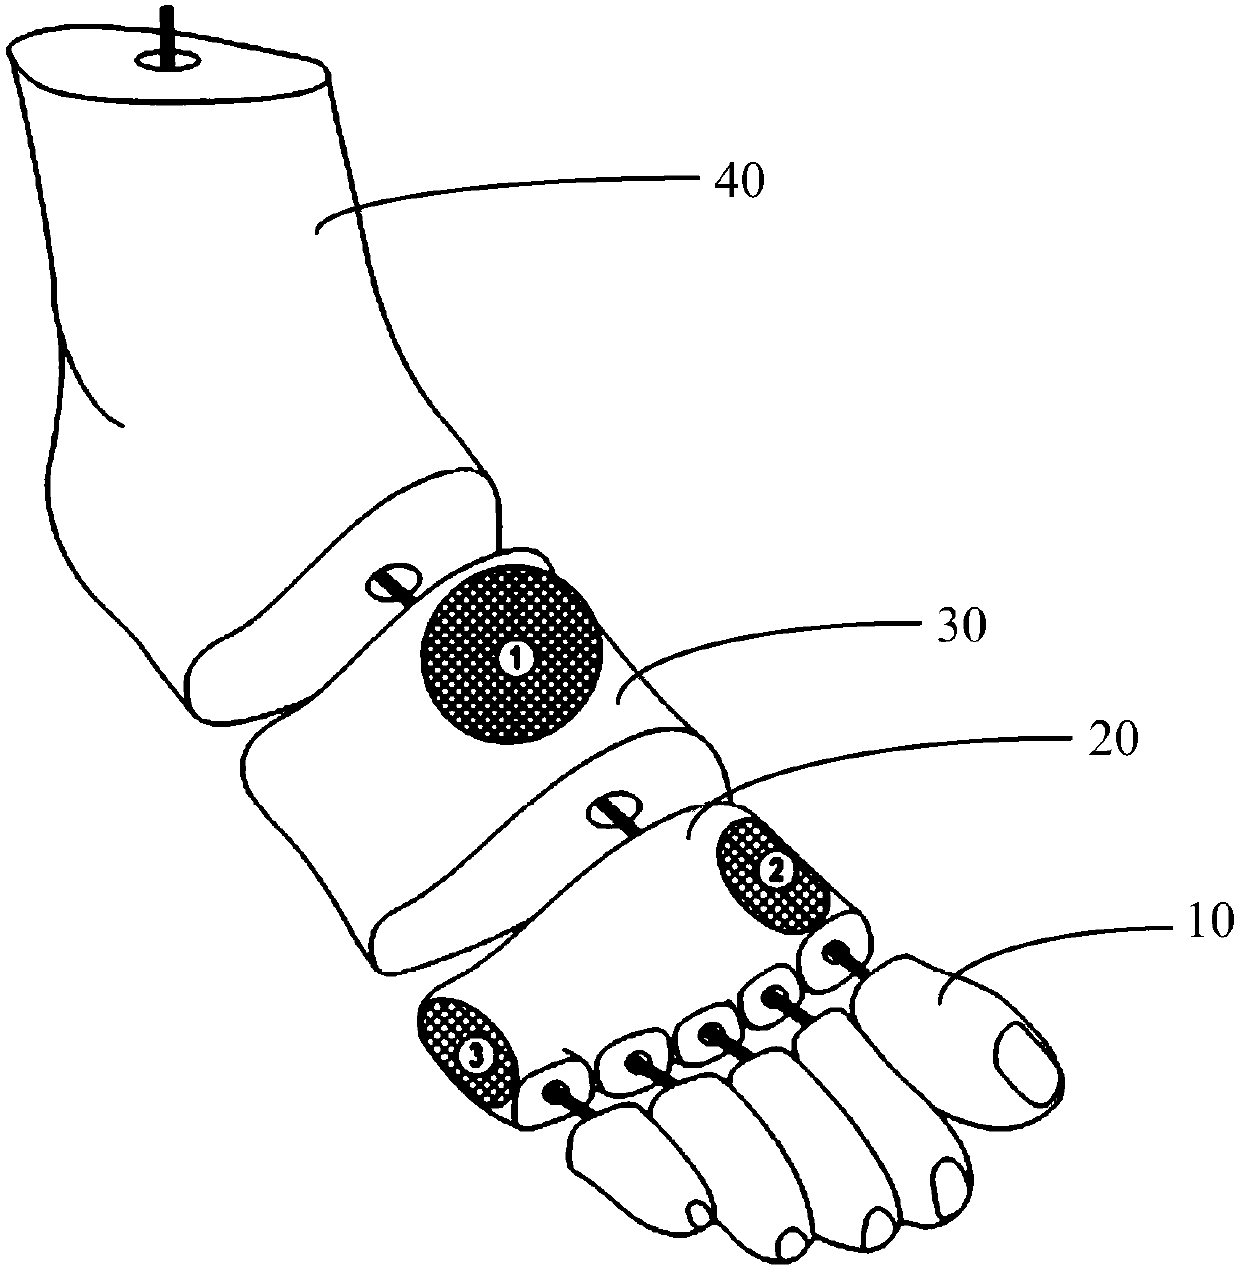 Adjustable measuring device for testing in-shoe foot fittability